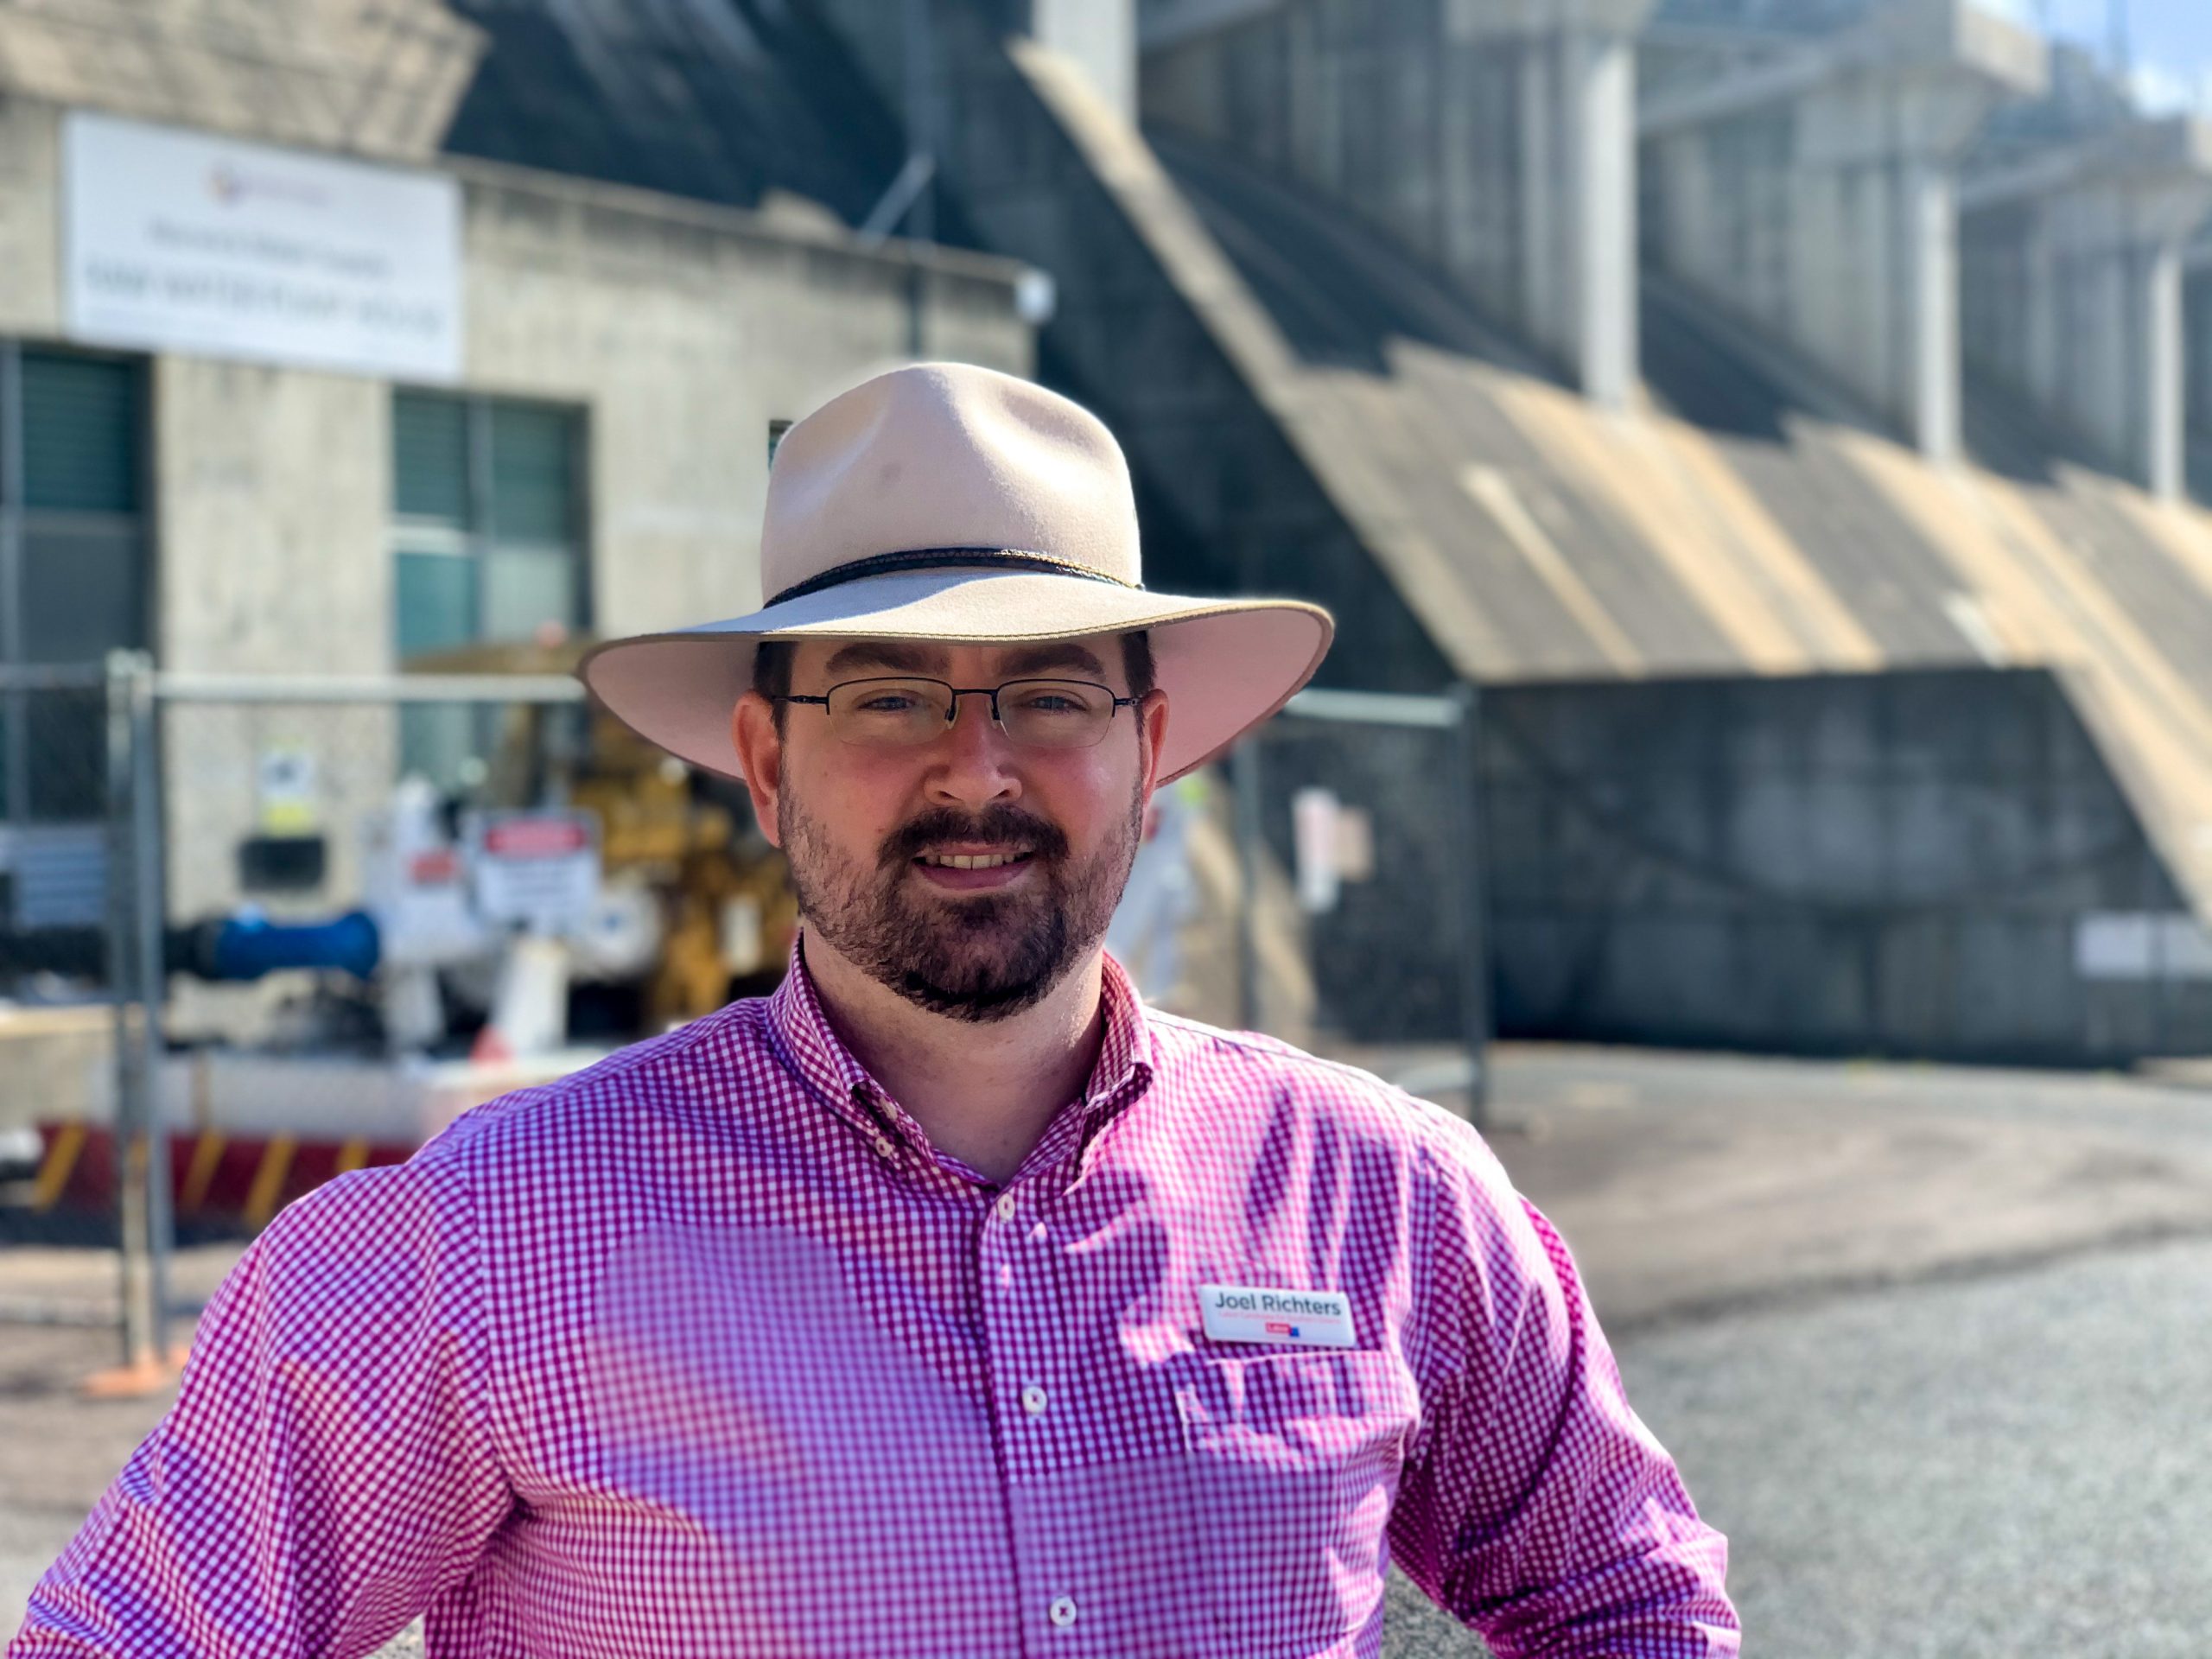 Joel Richters, Labor’s candidate for Southern Downs, wants to set the record straight on water prices in the local community. News broke Friday that a State Government levy increase of […]